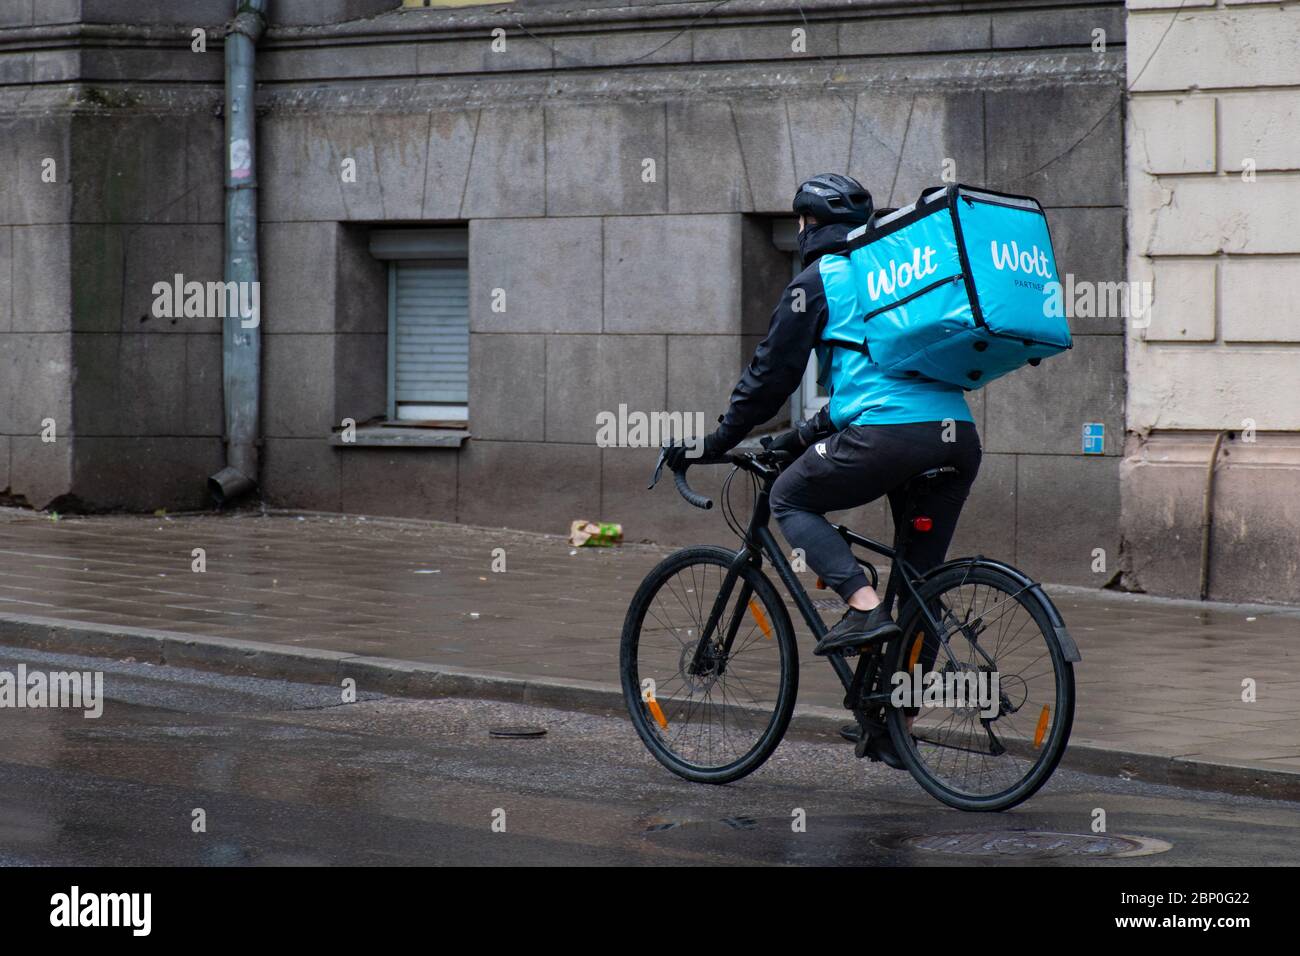 Wolt, online food ordering and delivery service that takes orders via a mobile app, rider with bike Stock Photo